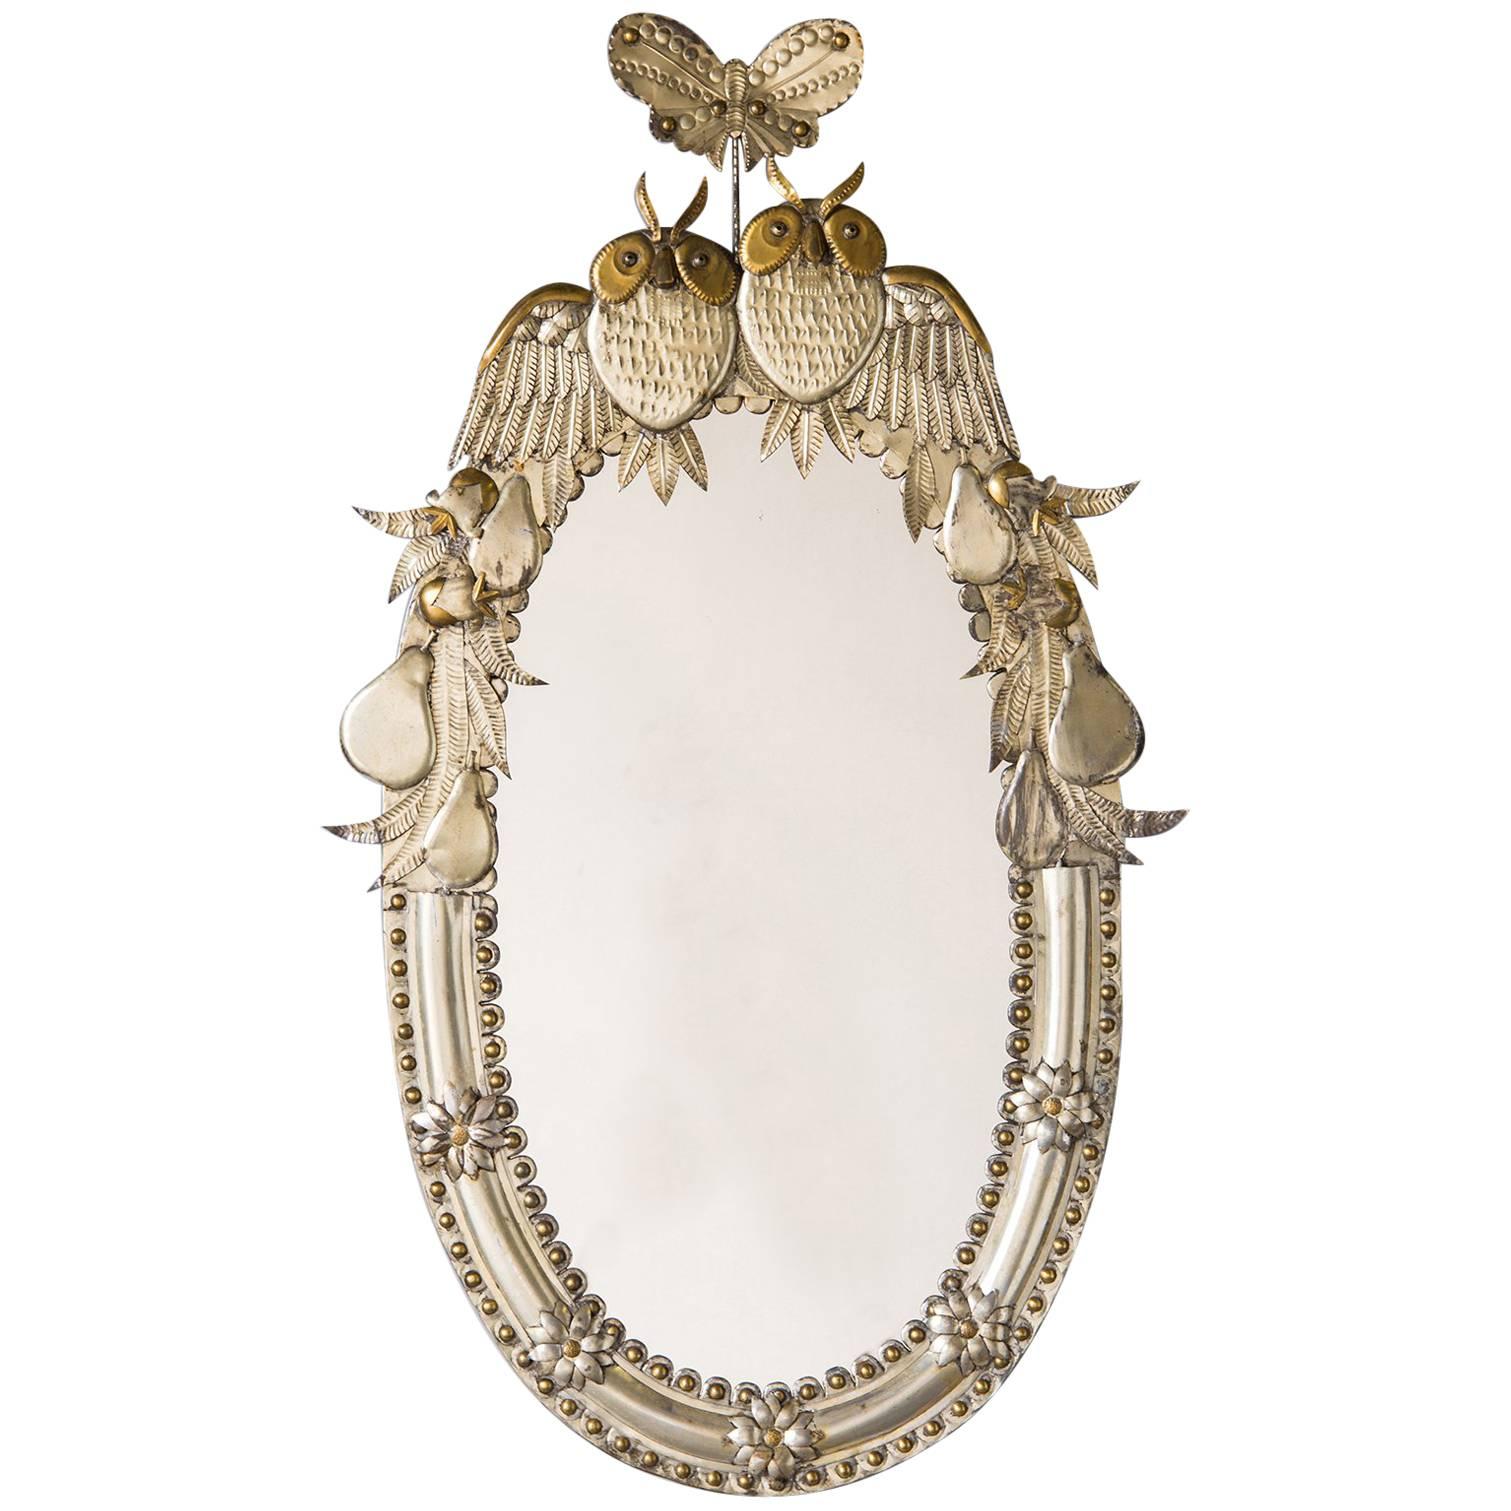 Handmade Oval Gilded Italian, Silvered Metal Mirror, Owls and Fruits, 1950